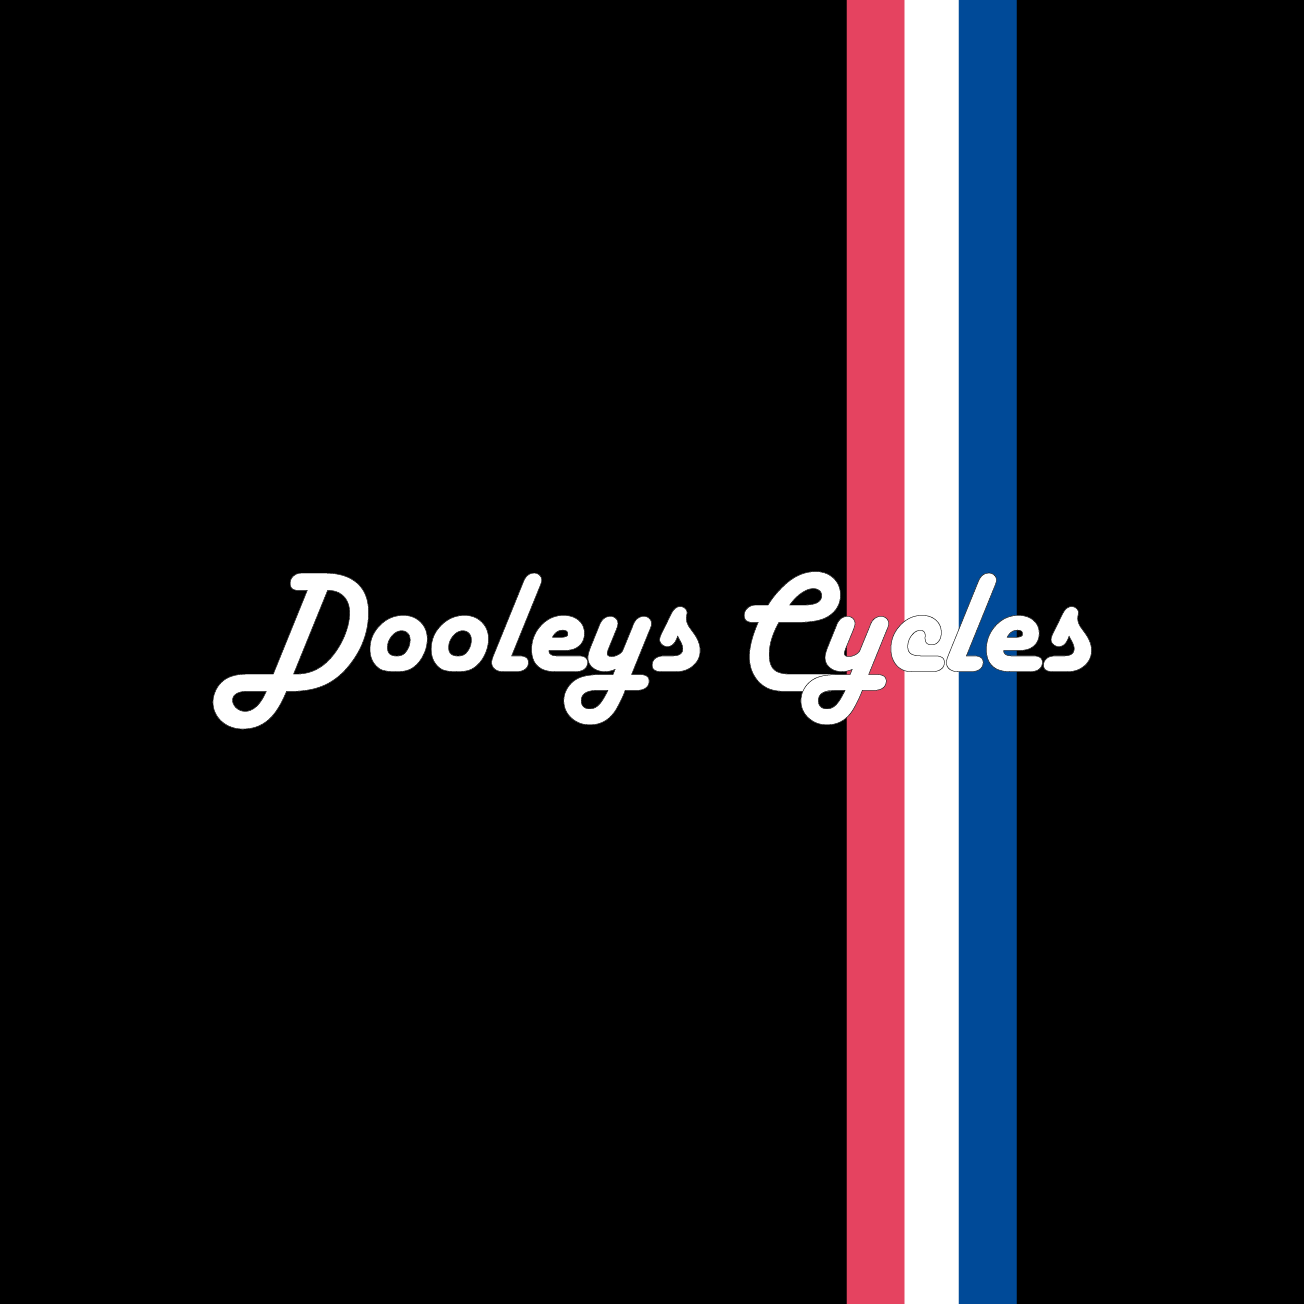 Club Image for DOOLEYS CYCLES